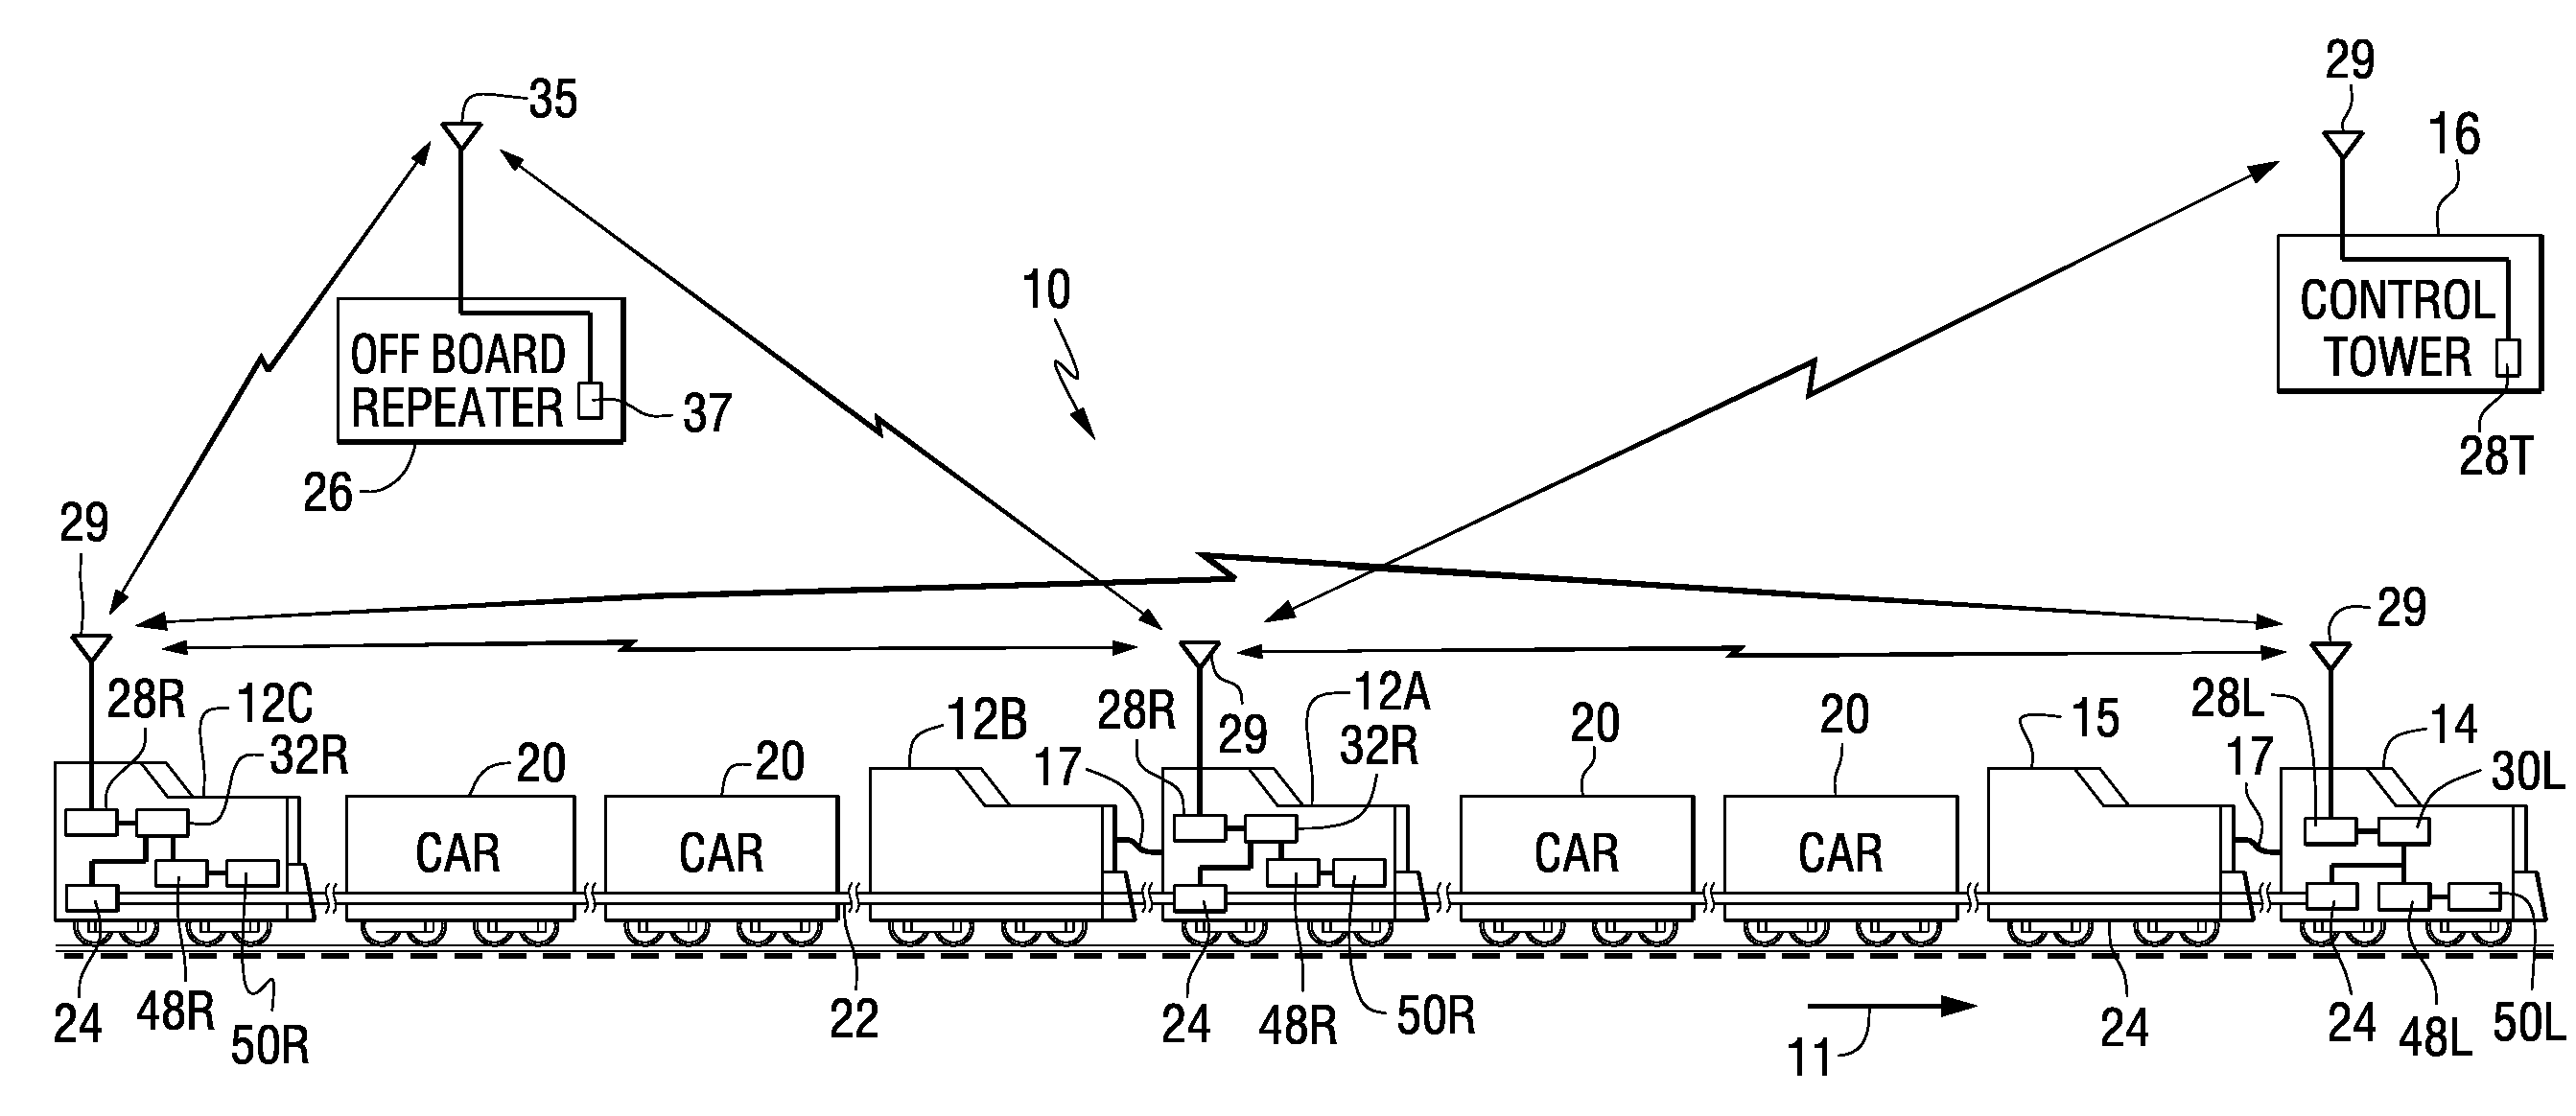 Method and system for using location information in conjunction with recorded operating information for a railroad train